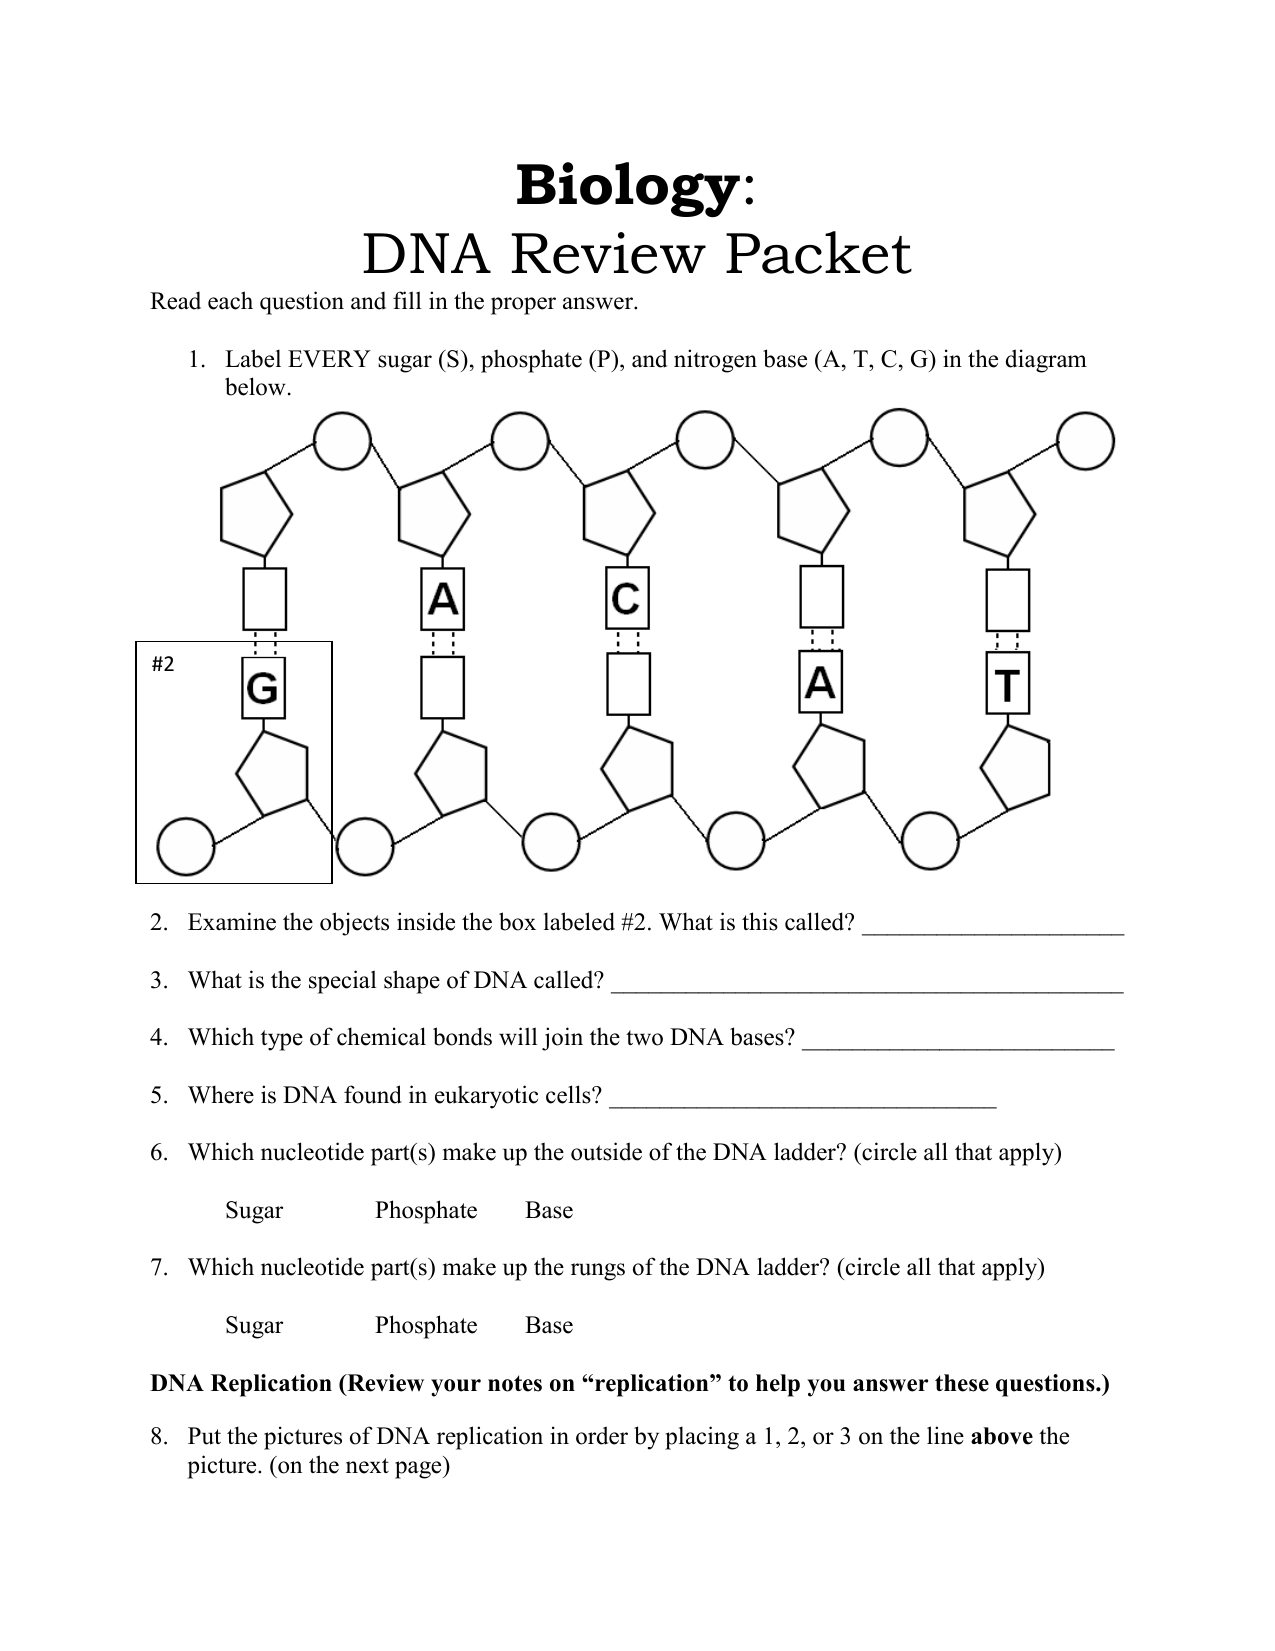 dna-replication-worksheet-answer-key-quizlet-loudlyeccentric-34-dna-coloring-transcription